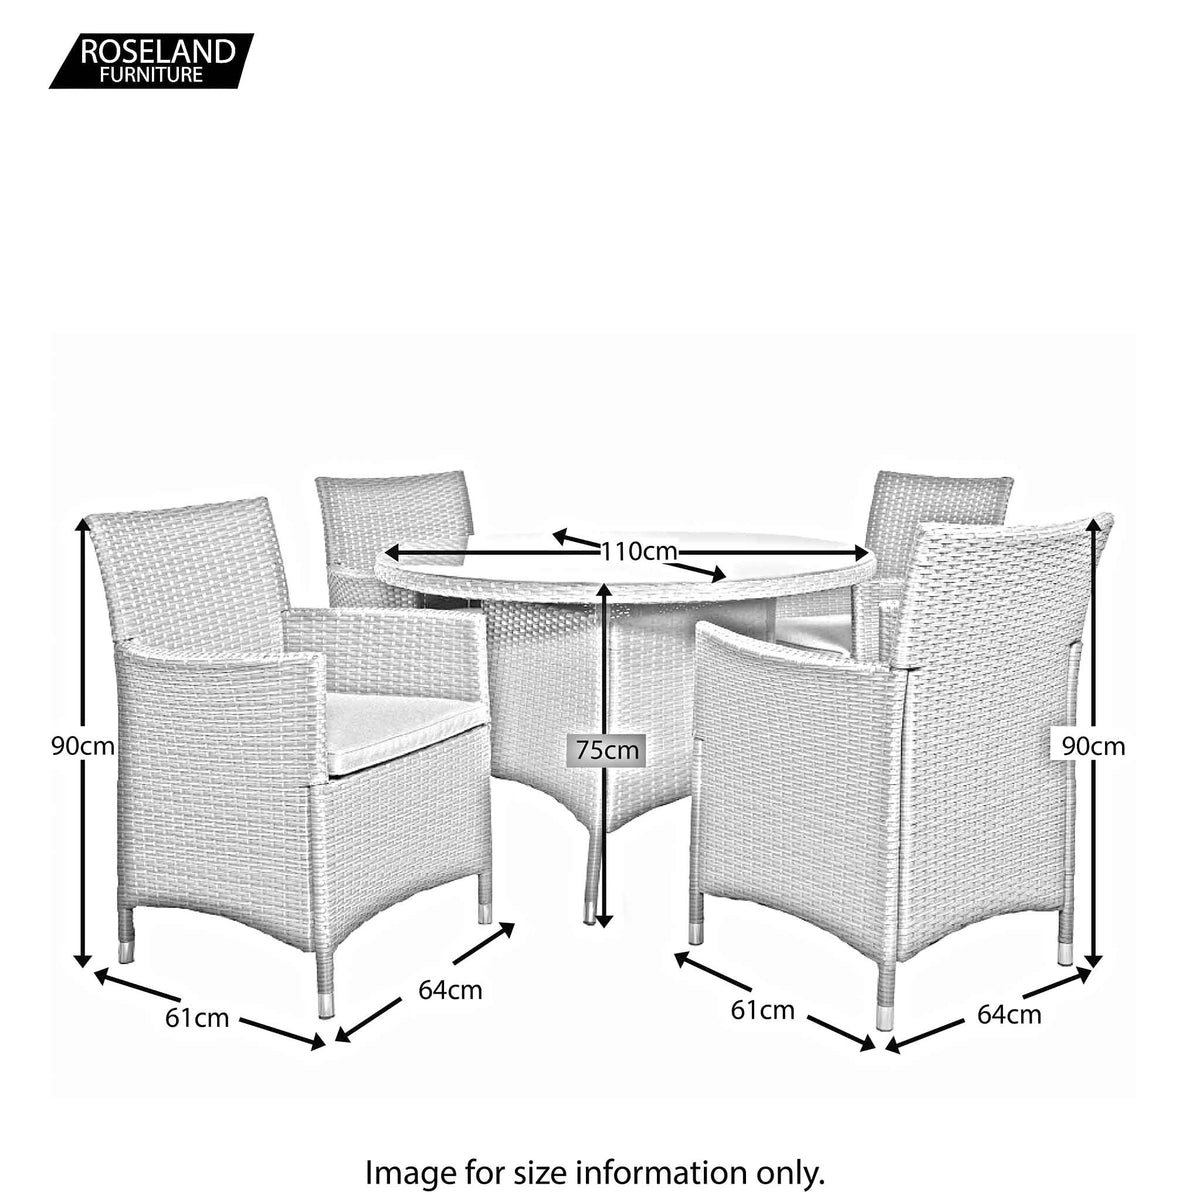 Vada 110cm 4 Seat Rattan Round Dining Set - Size Guide